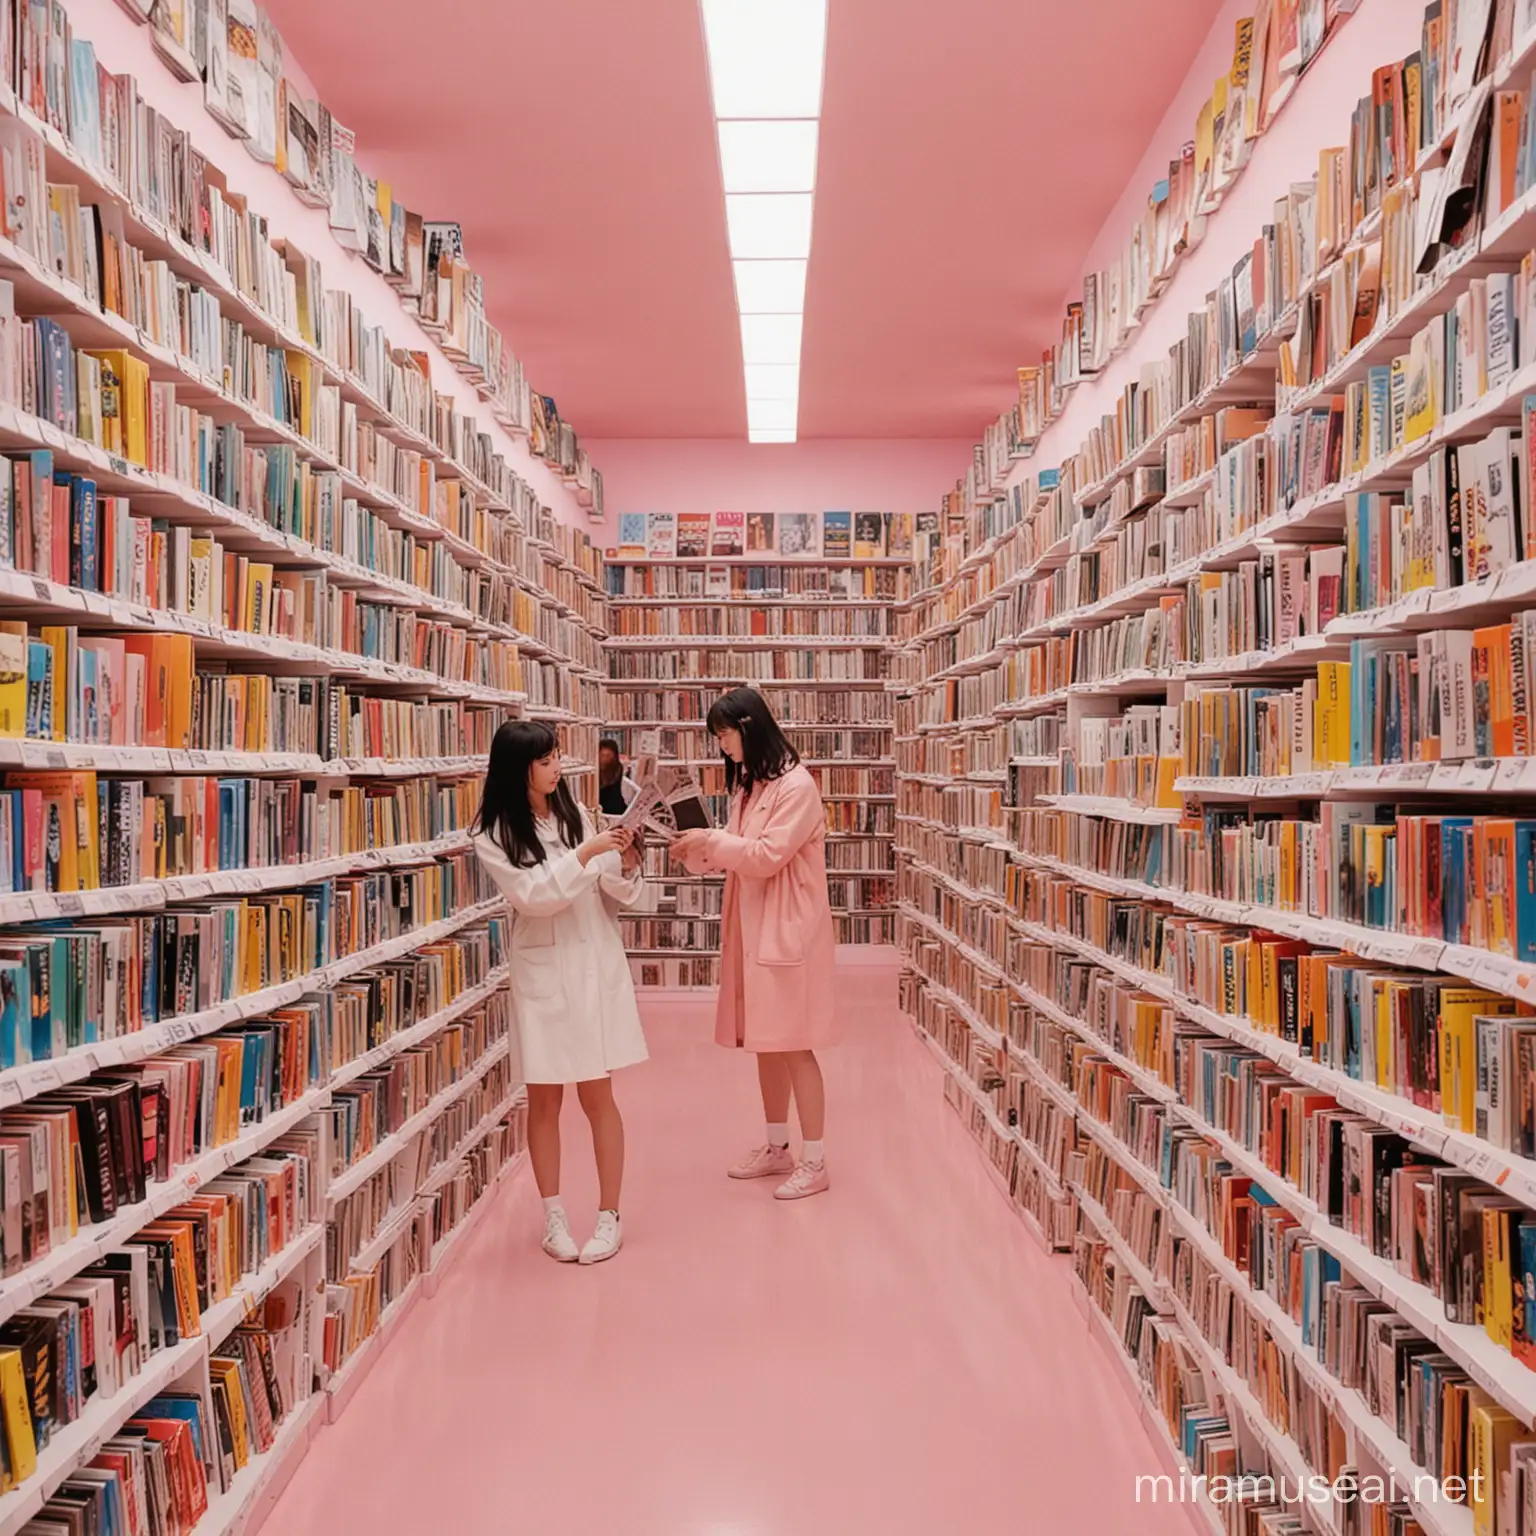 people in a commercial inside a brightly rainbow colored museum flipping magazines in small stacks. the magazines are colorful japanese decora 90s fashion magazines